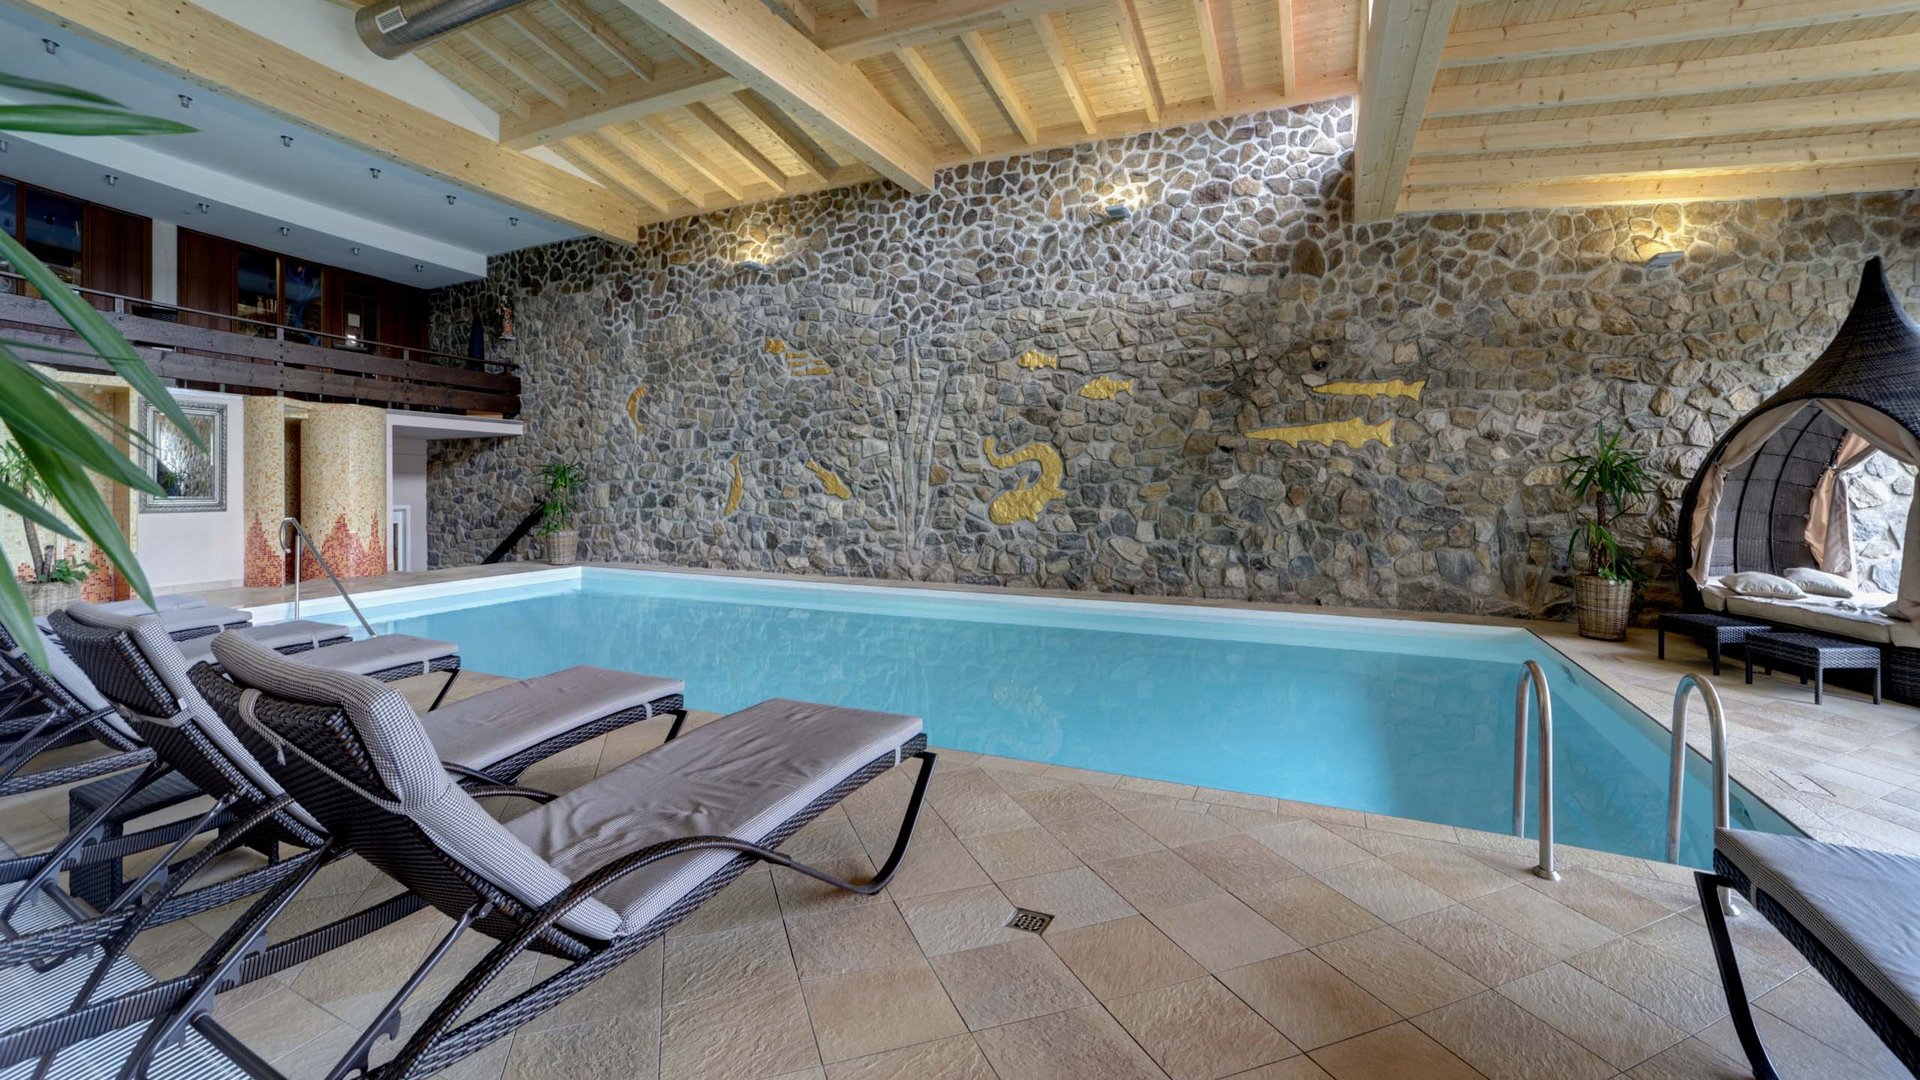 Spa holidays at the hotel in Bodenmais with a swimming pool